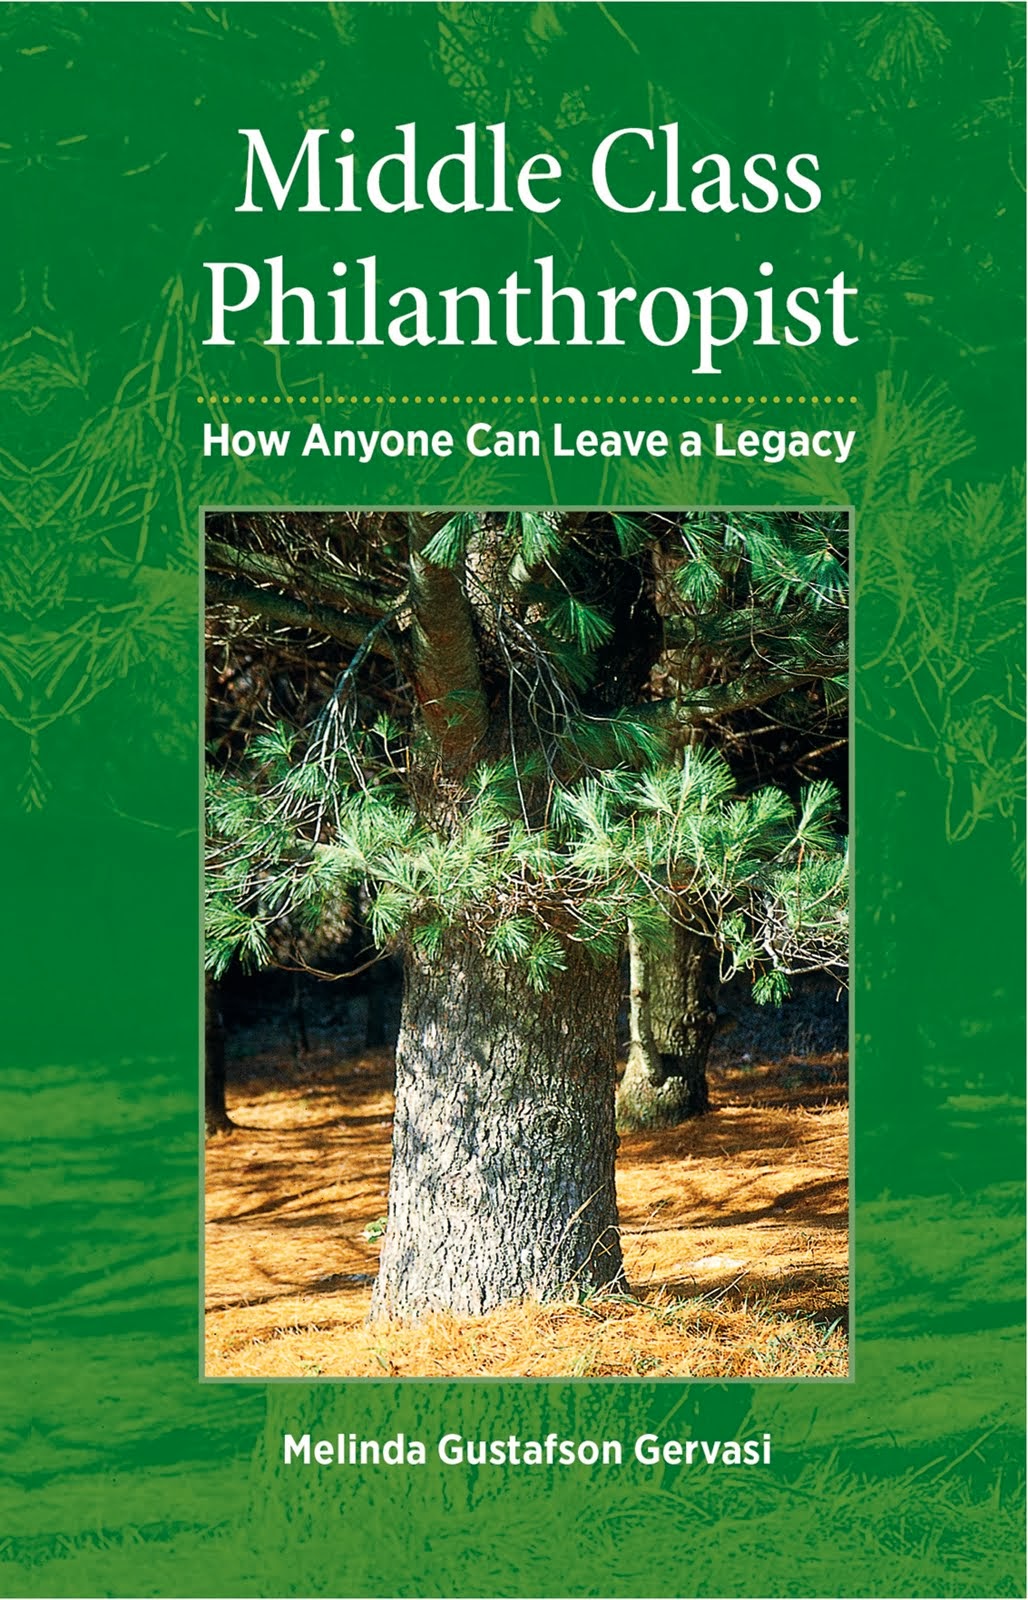 Middle Class Philanthropist: How anyone can leave a legacy by Melinda Gustafson Gervasi.